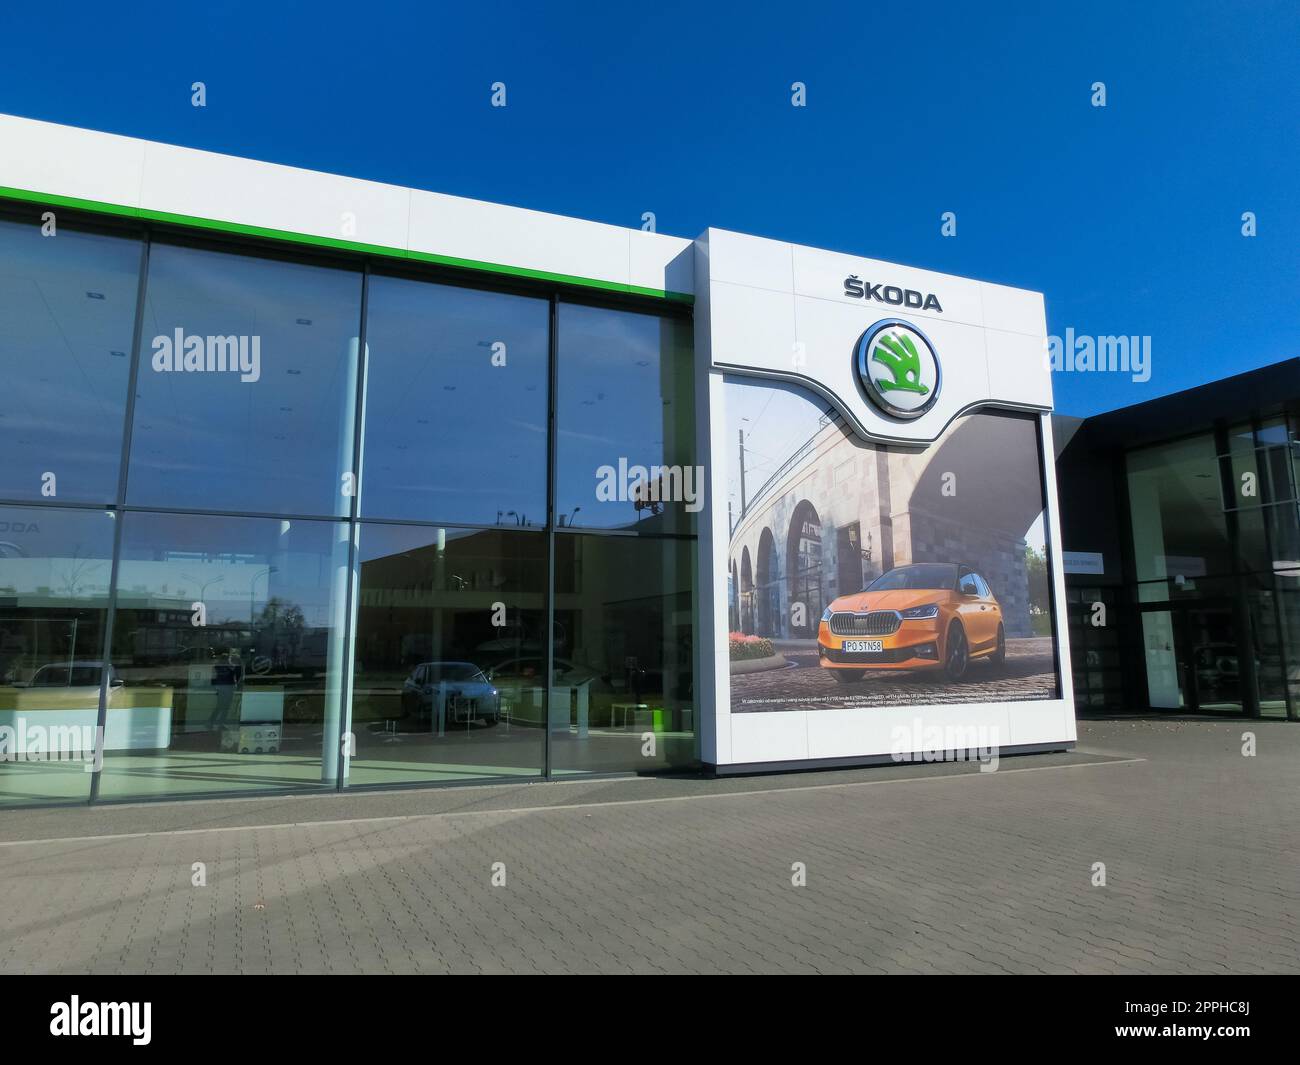 Company store building with an emblem of Skoda Auto, Czech automobile manufacturer. Stock Photo